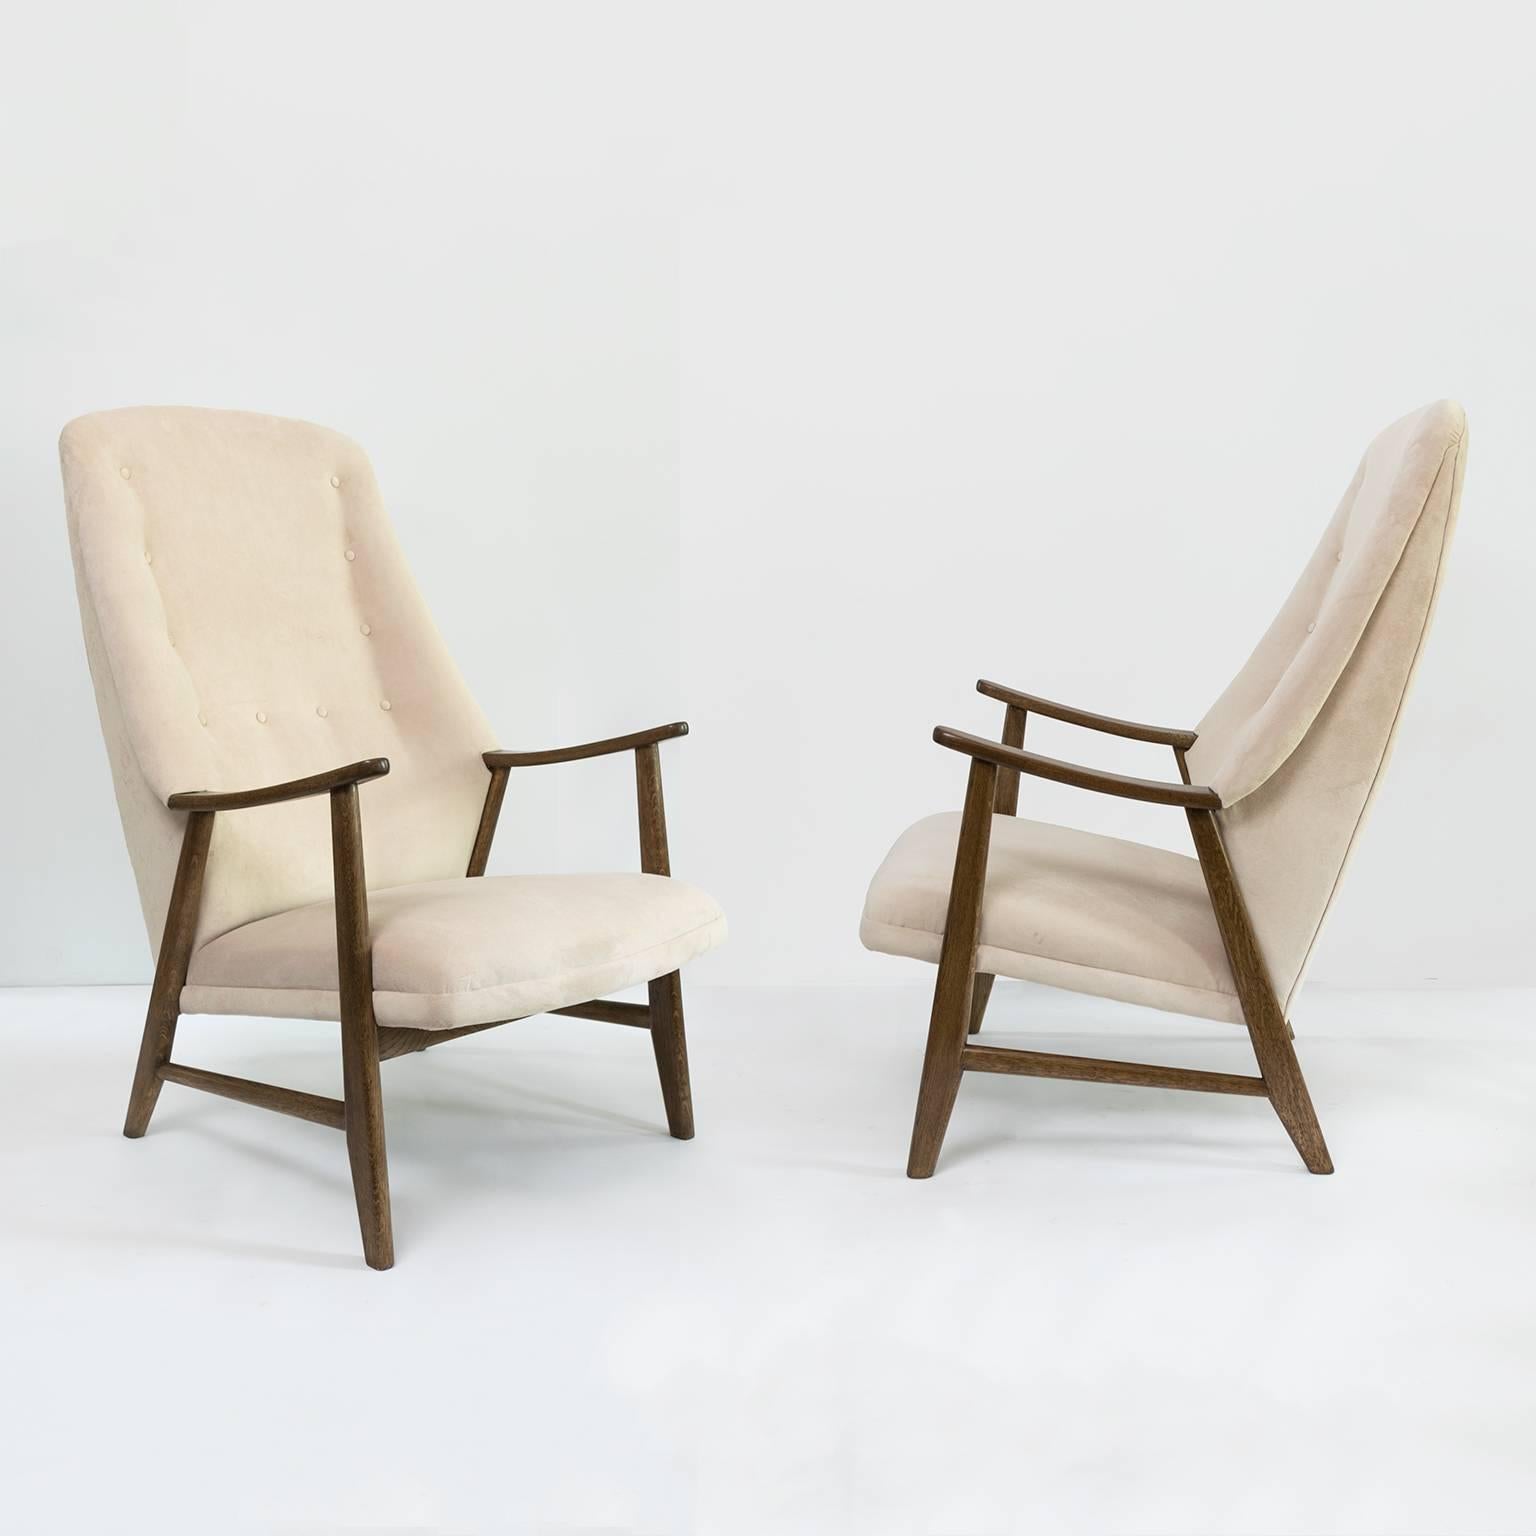 Scandinavian Modern pair of high back stained teak armchairs. Chairs have newly restored frames and off white velvet upholstery. Made in Denmark, circa 1950s. Measures: Height 42